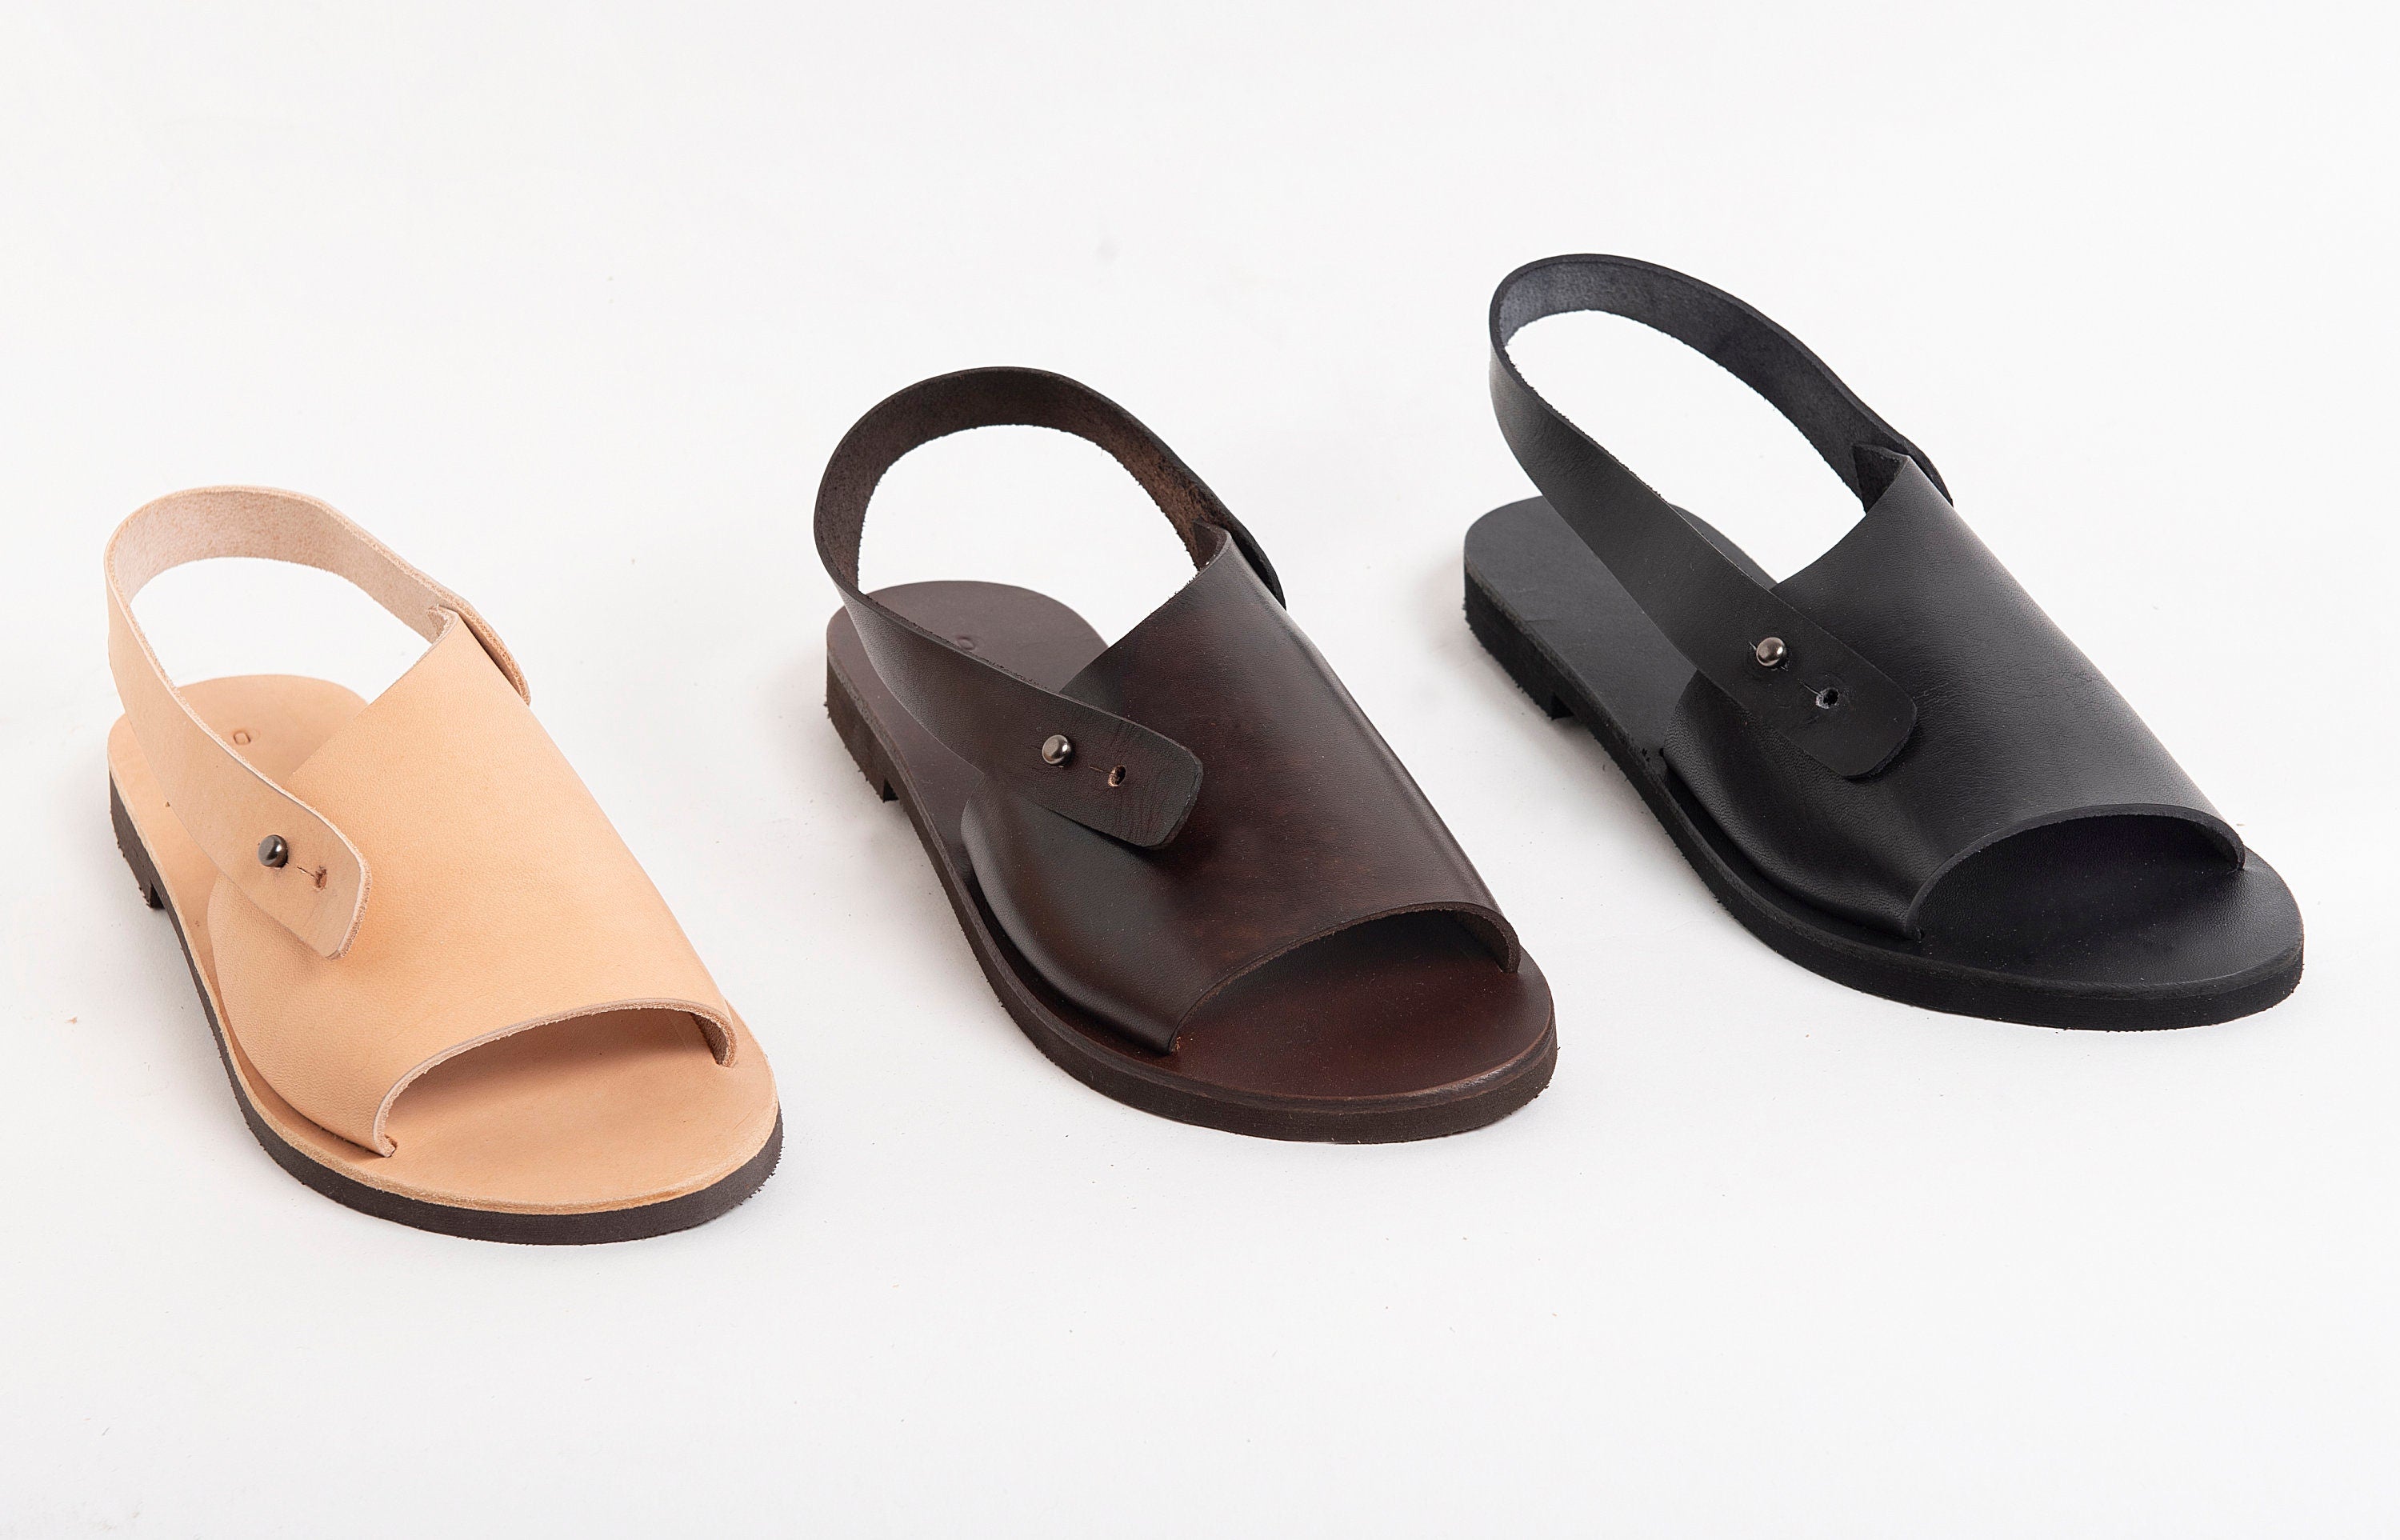 BROWN SUMMER SHOES, sandals women leather "Nepheli"